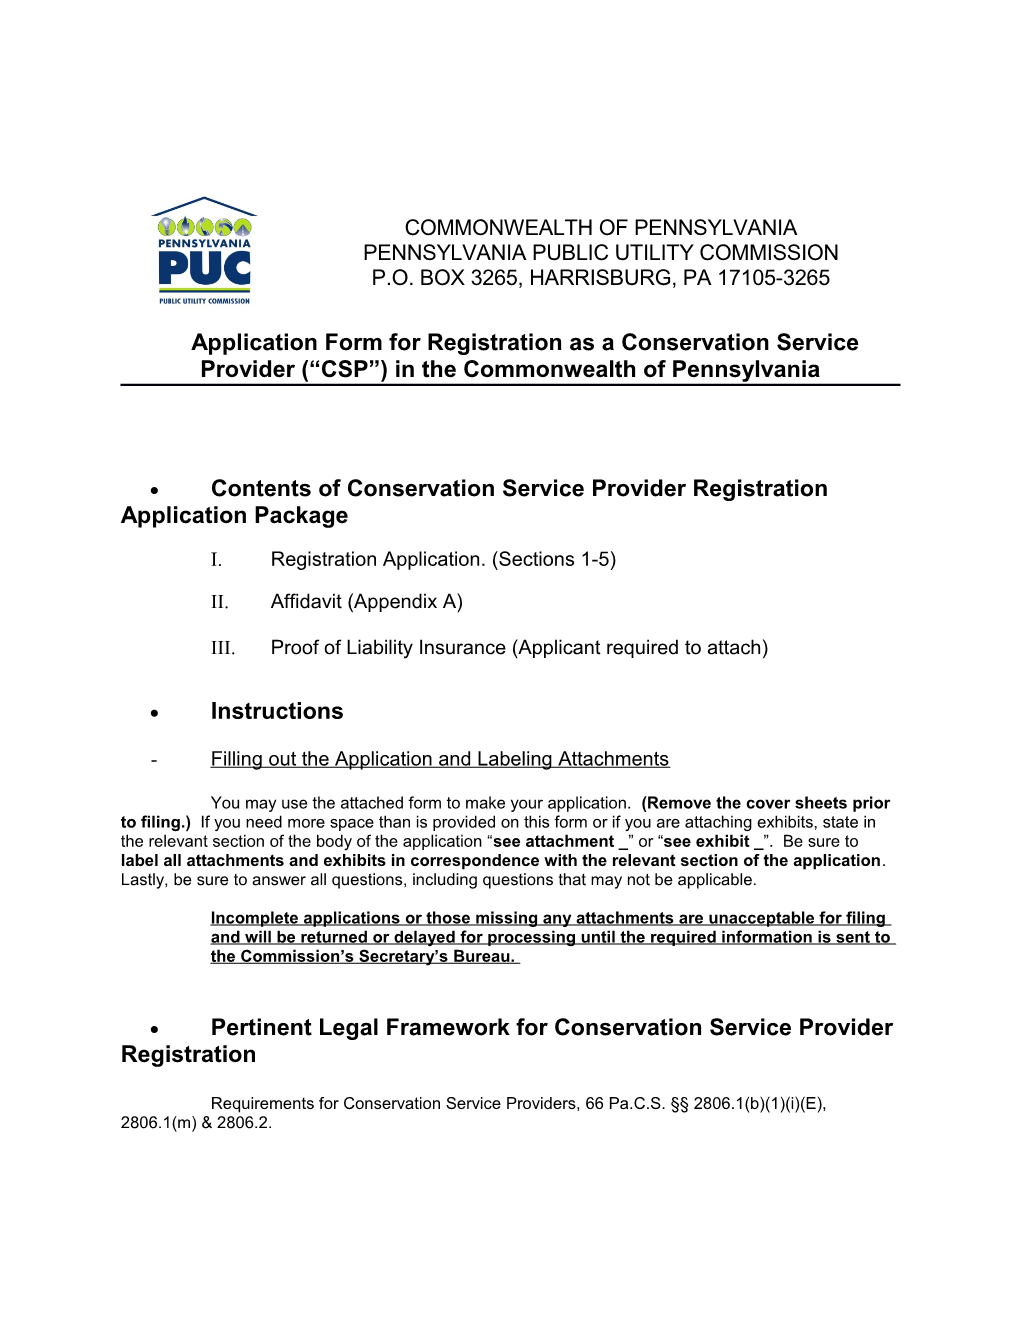 Application Form for Registration As a Conservation Service Provider ( CSP ) in The